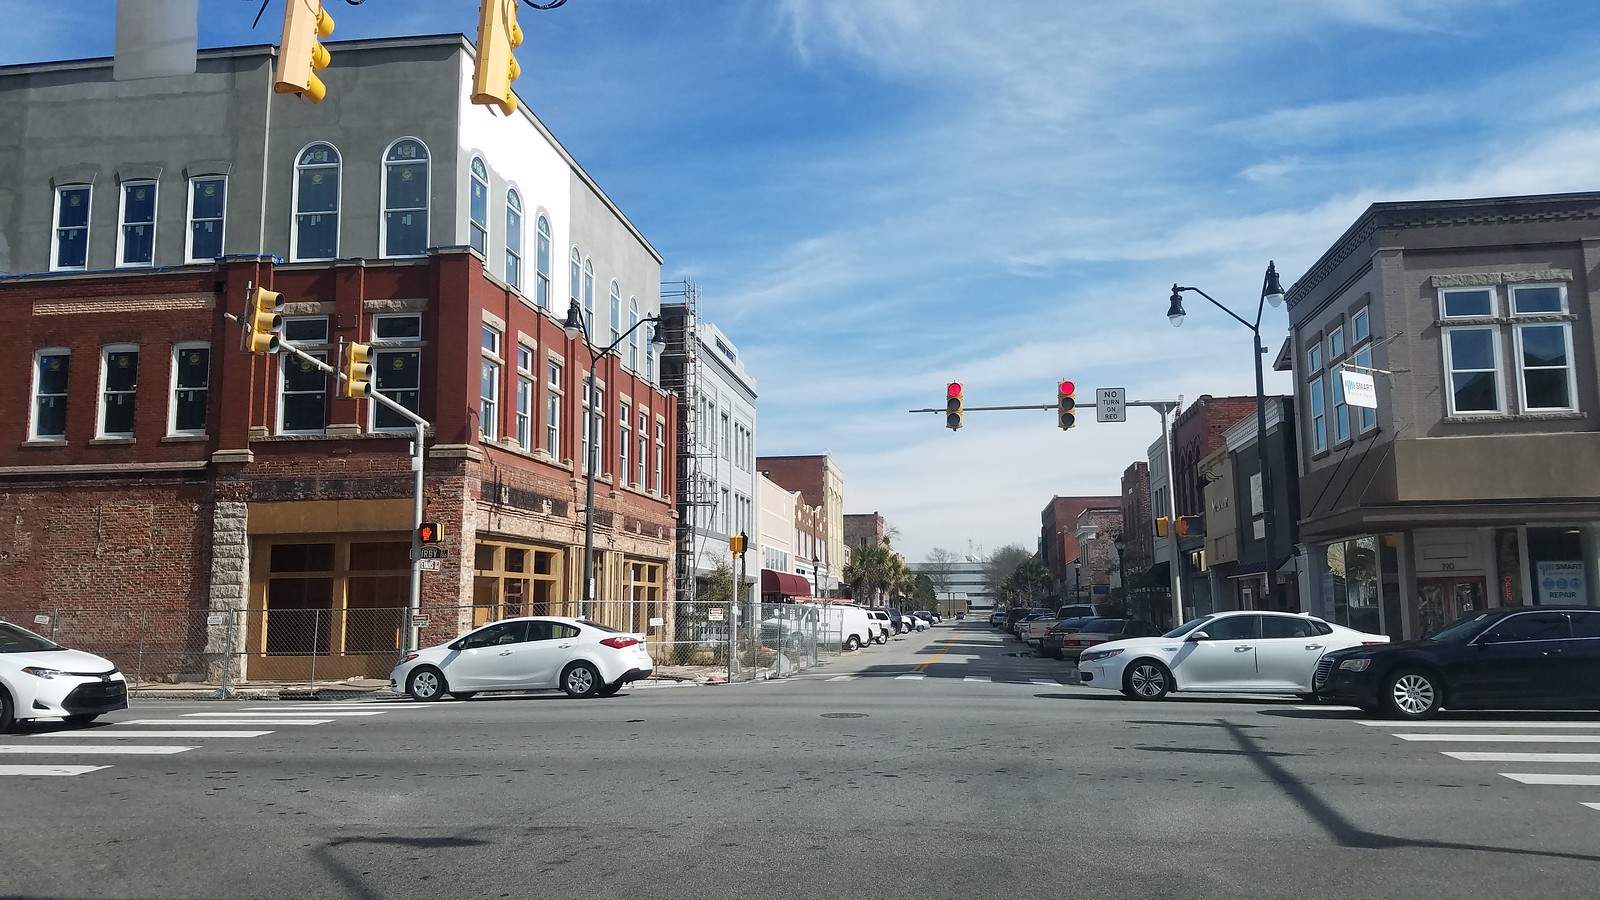 downtown florence sc is booming (Greenville, Sumter ...